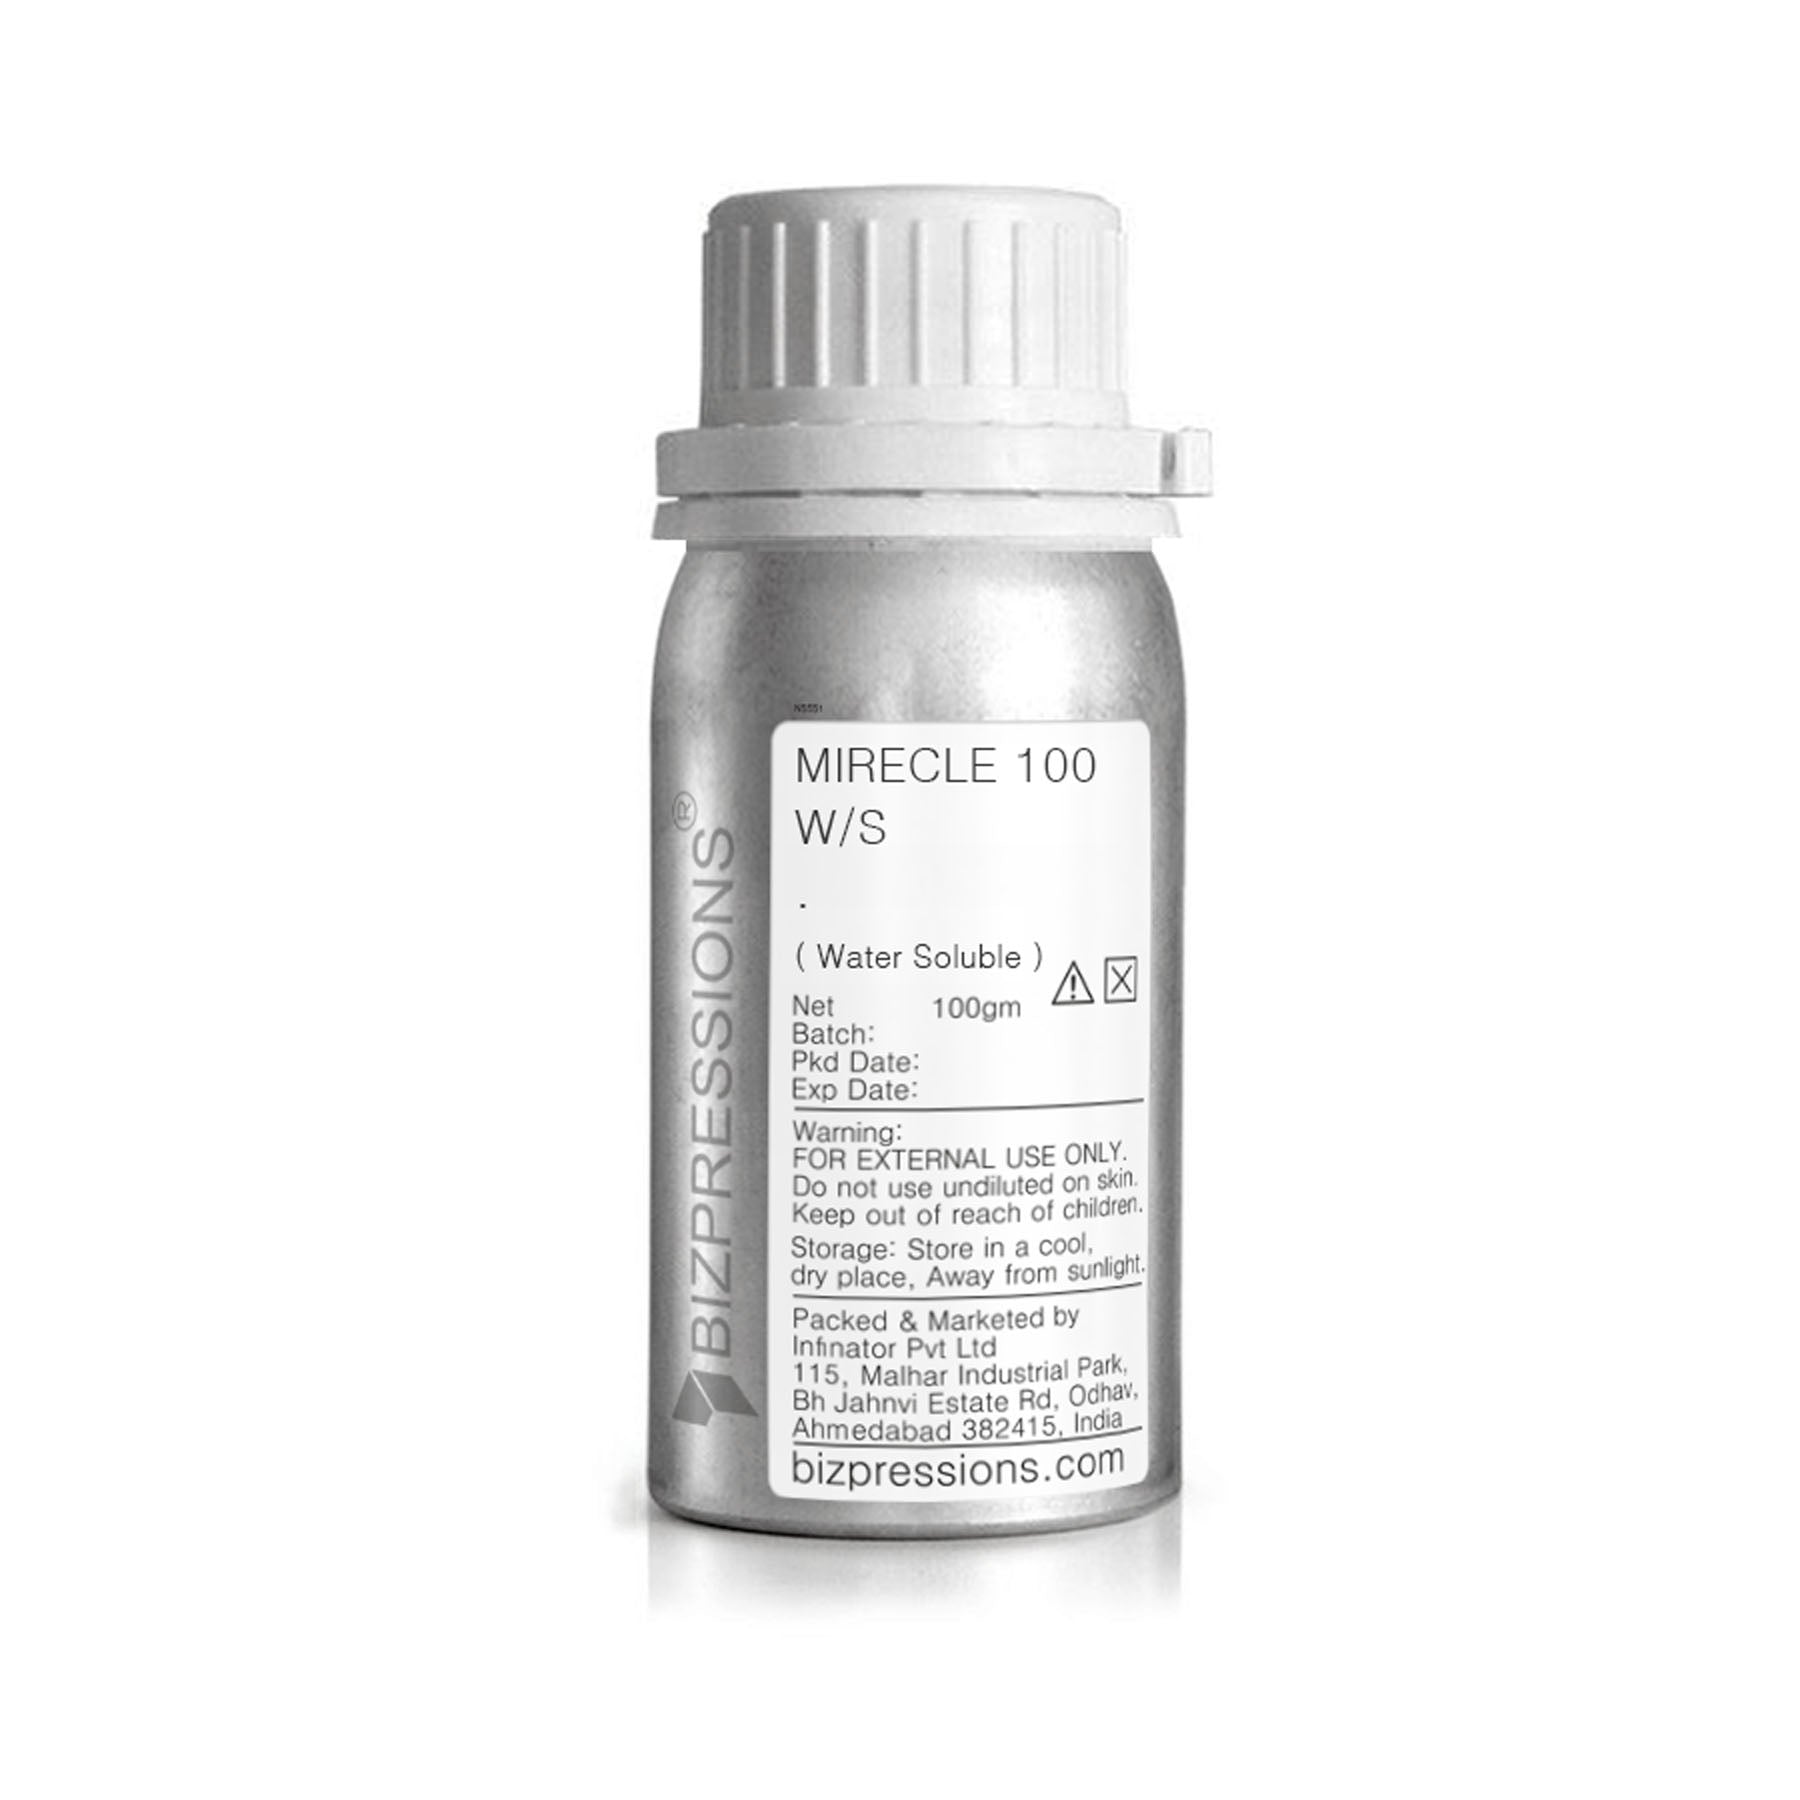 MIRECLE 100 W/S - Fragrance ( Water Soluble ) - 100 gm